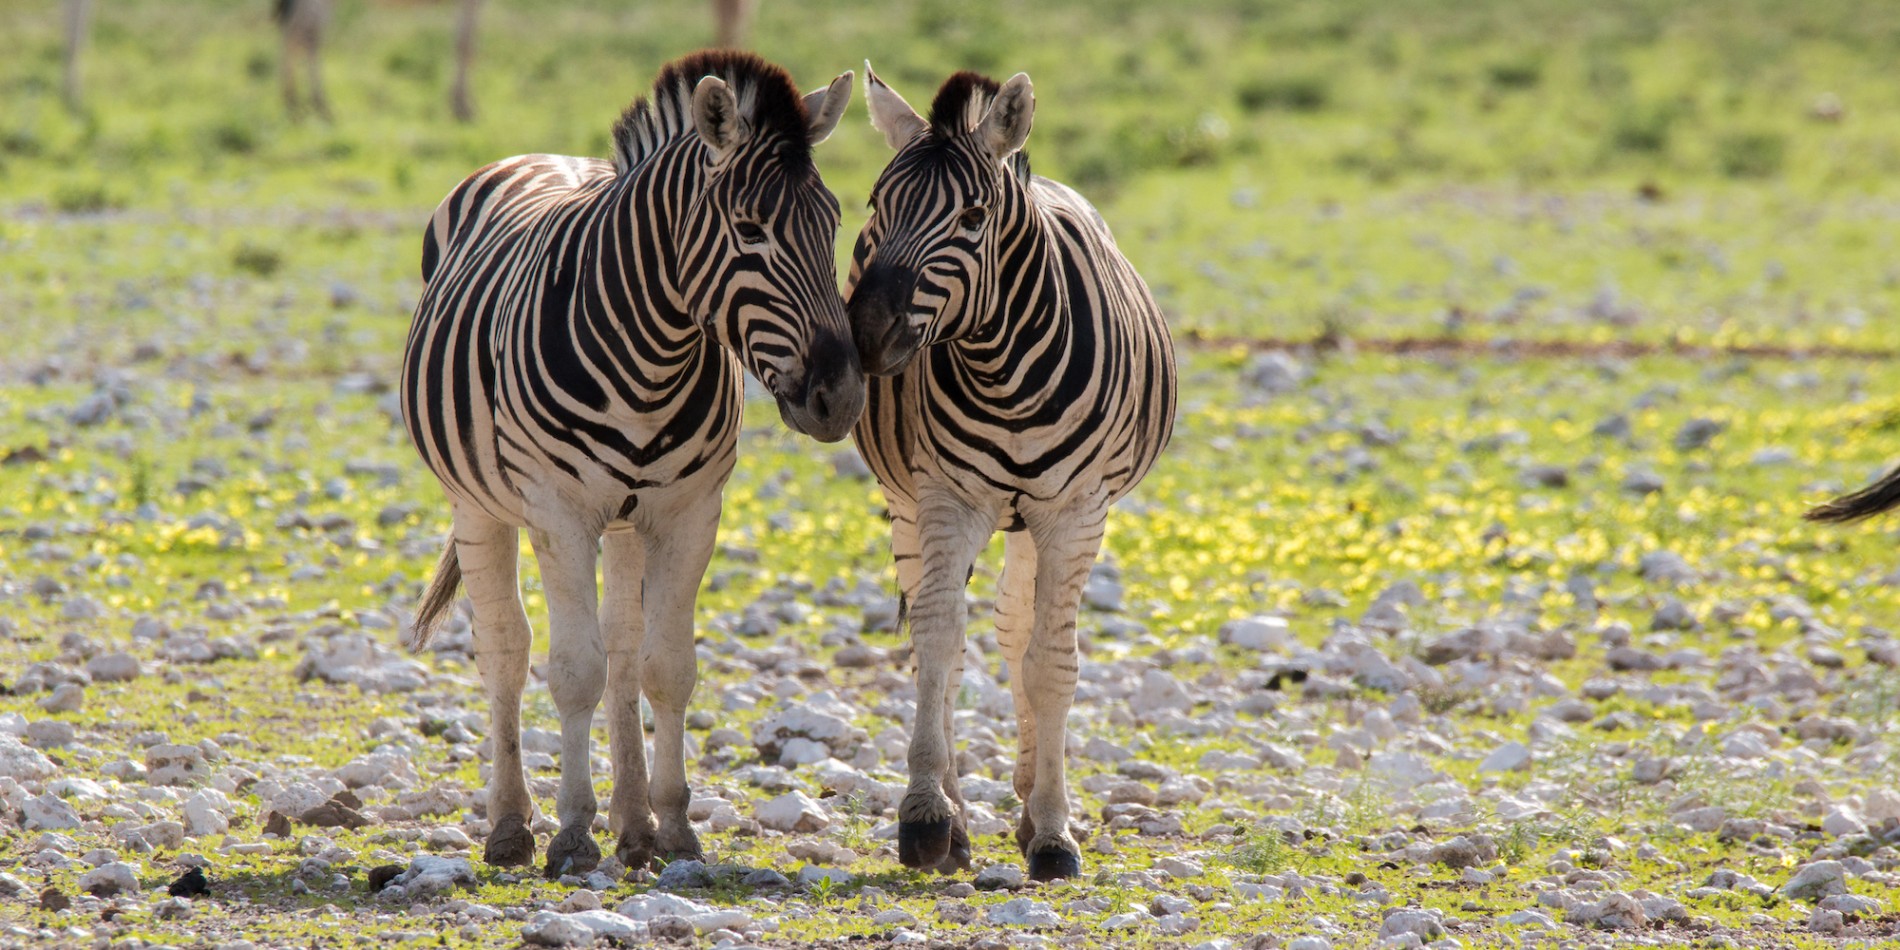 Two zebras bumping their heads together while walking on rocks and grass